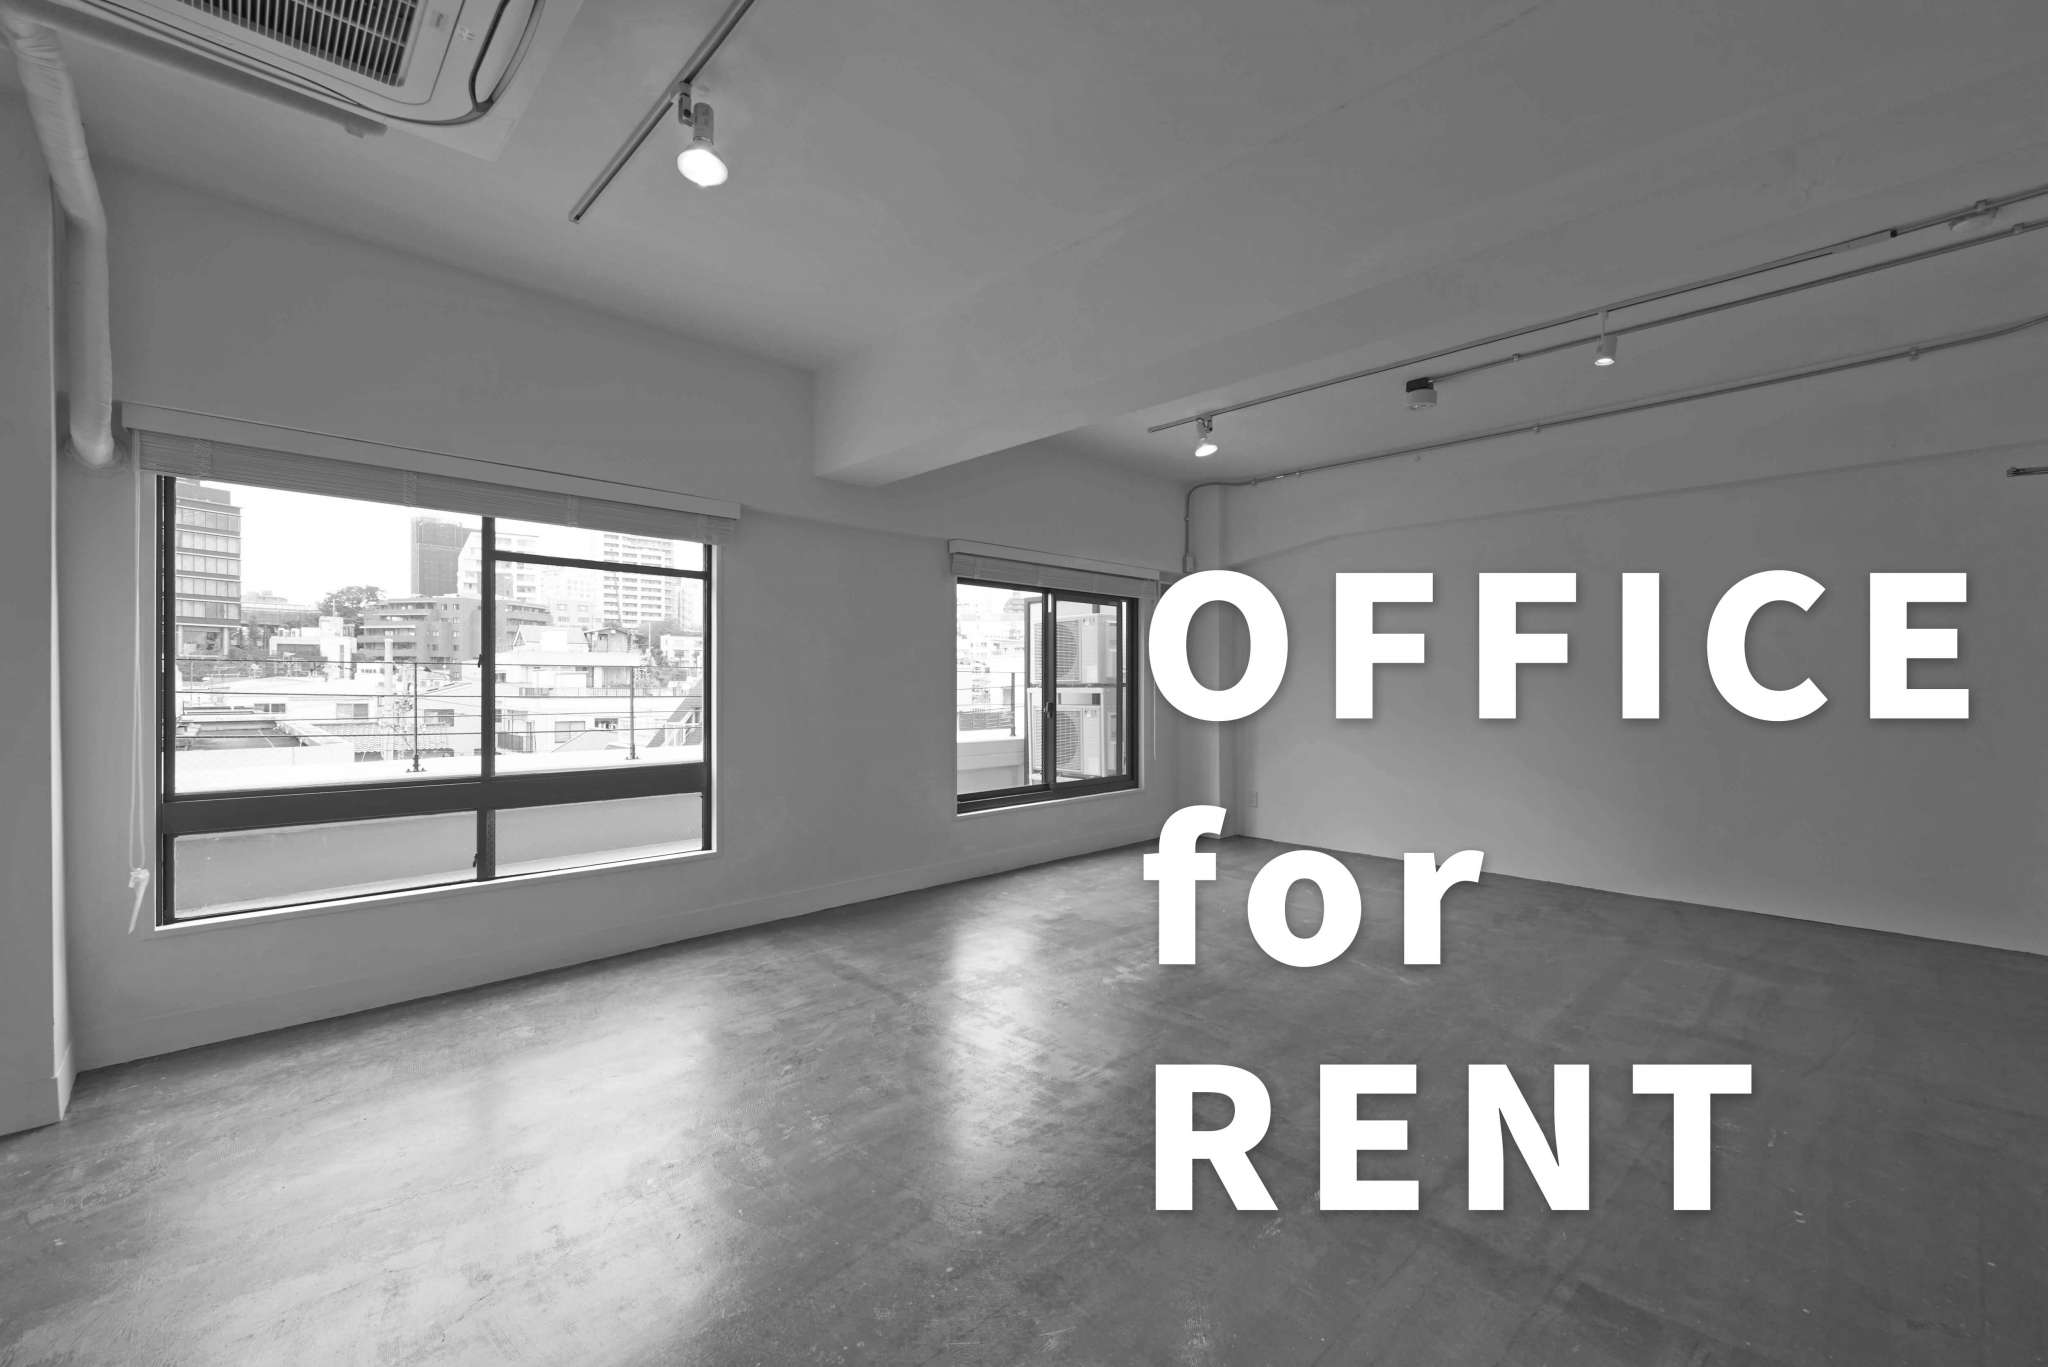 OFFICE for RENT